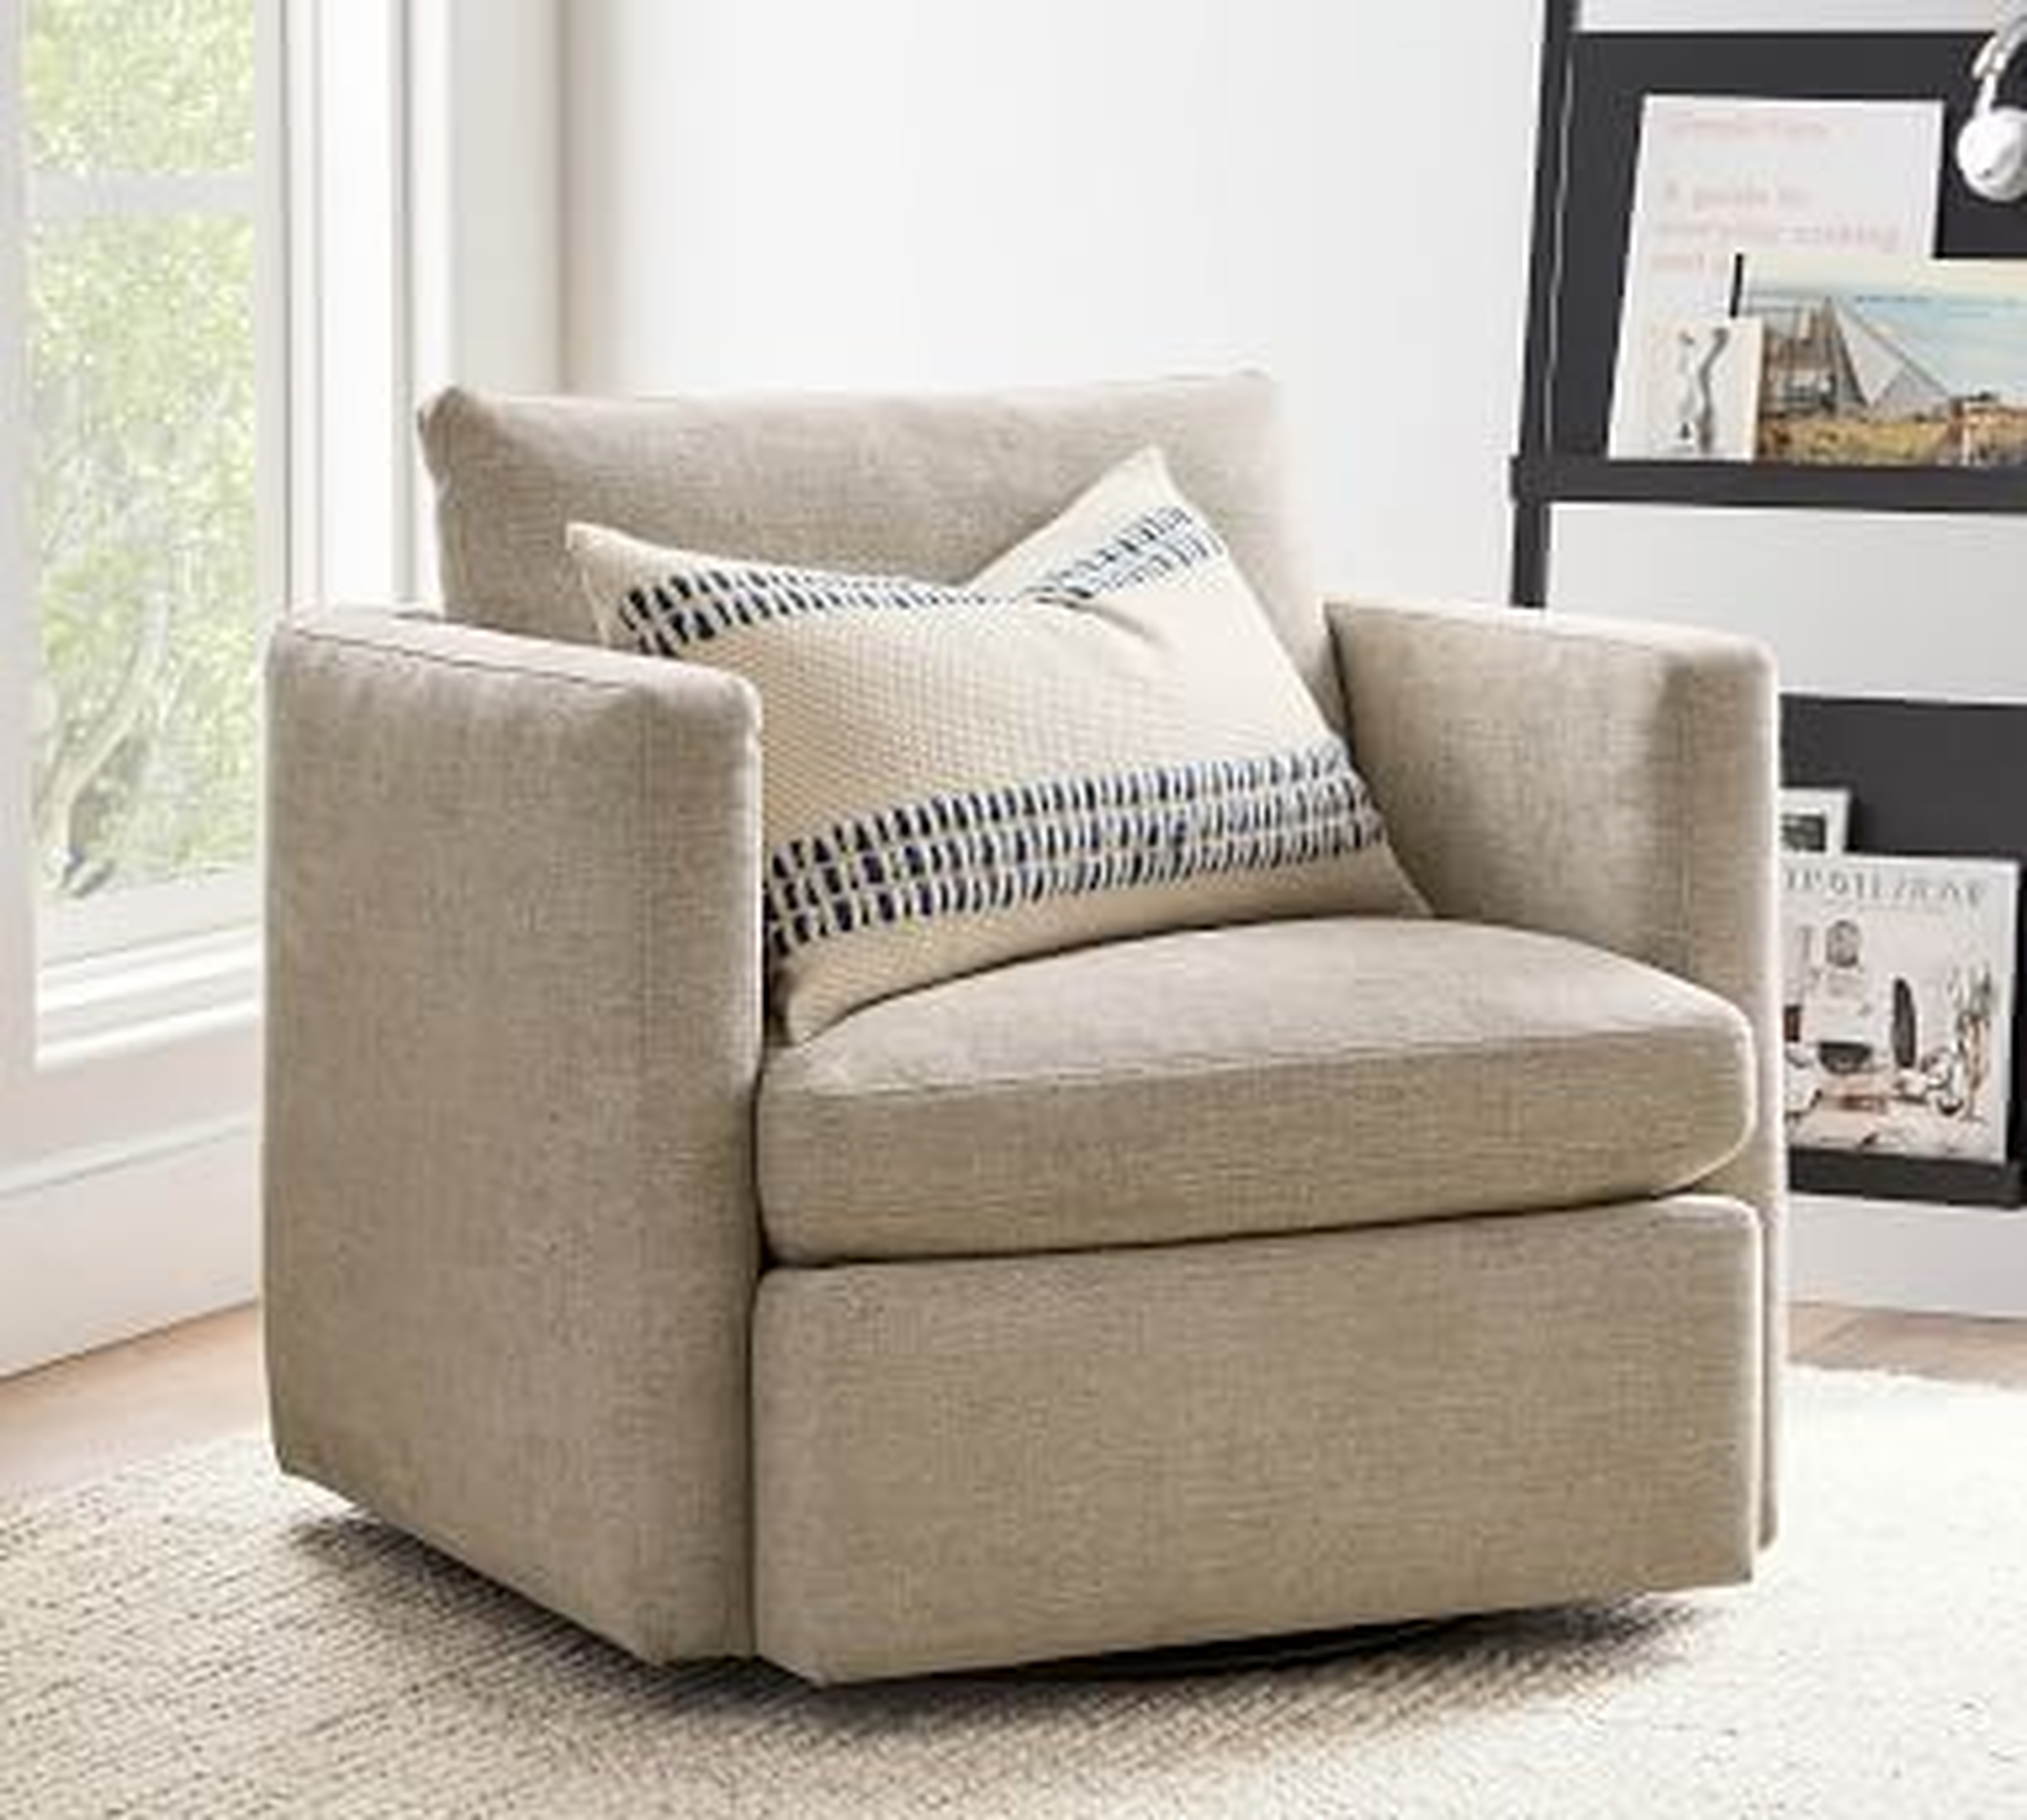 Menlo Upholstered Swivel Armchair, Polyester Wrapped Cushions - Pottery Barn